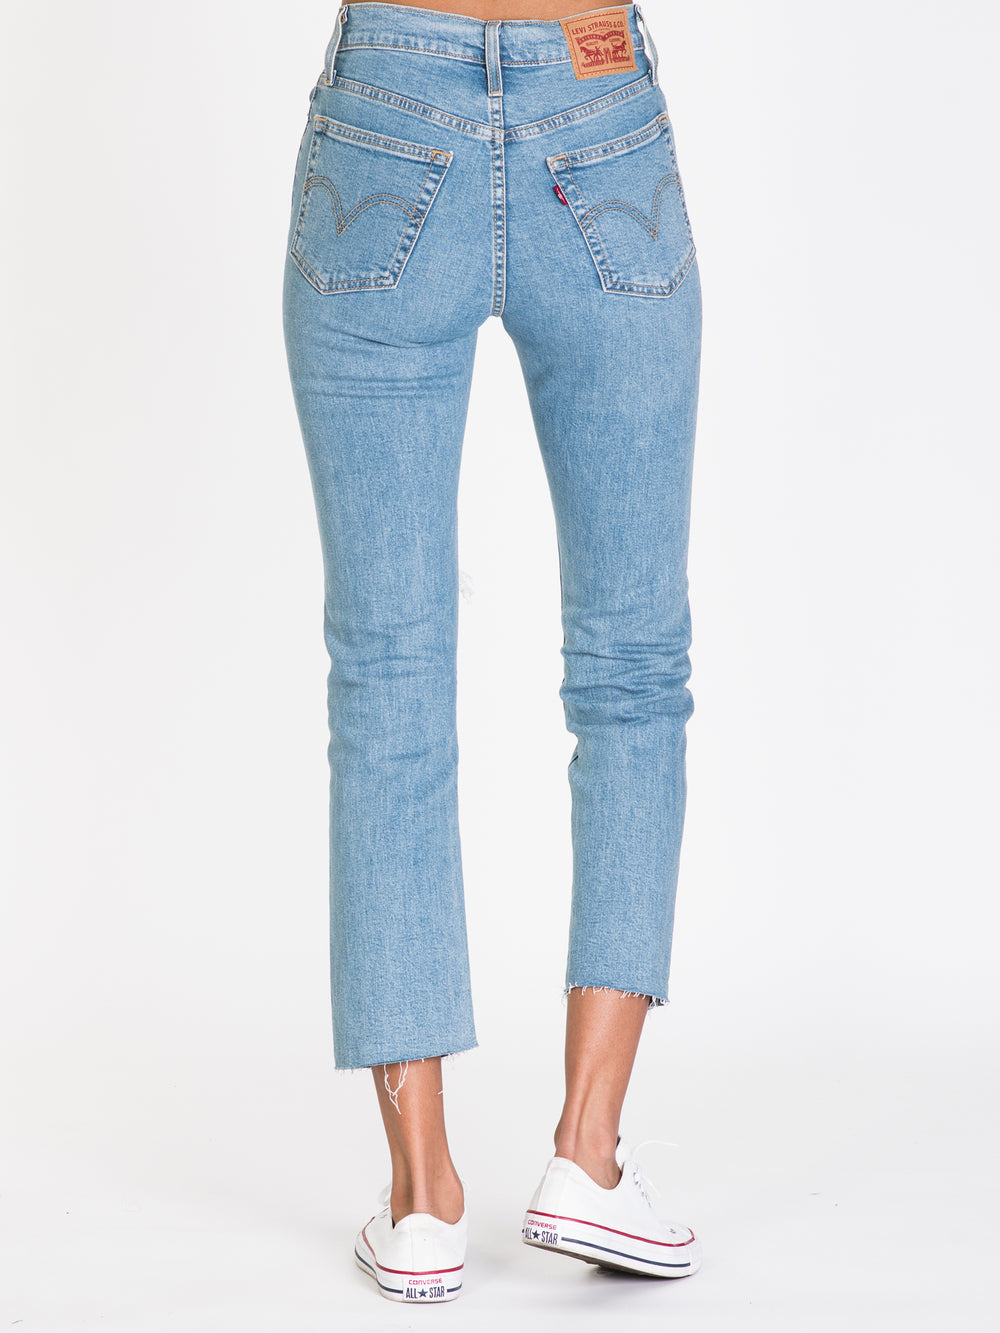 LEVIS WEDGIE STRAIGHT JEAN - CLEARANCE